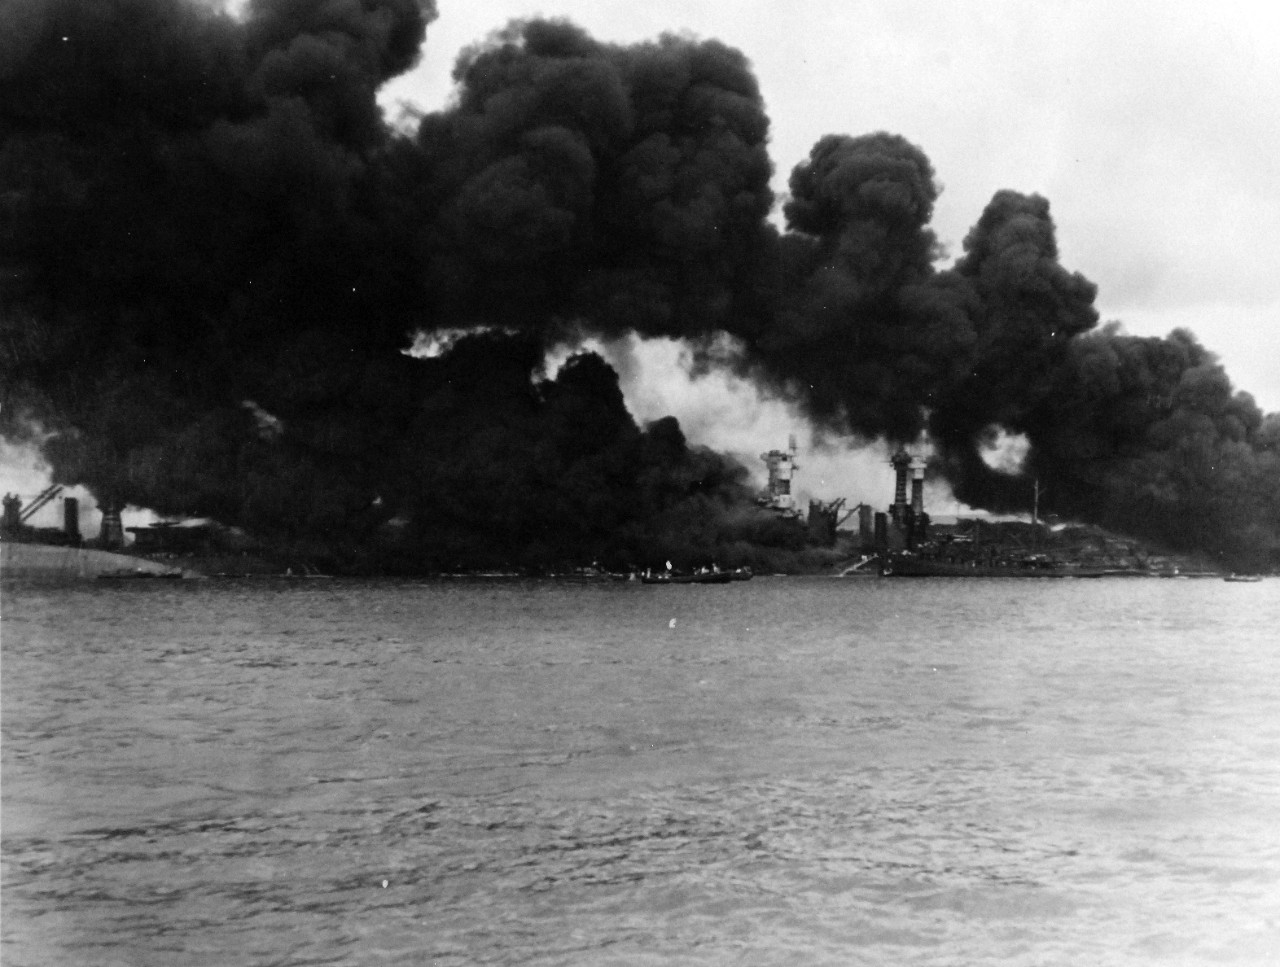 <p>80-G-32416: Japanese Attack on Pearl Harbor, December 7, 1941. View of “Battleship Row” during or immediately after the Japanese raid. USS West Virginia (BB 48) and USS Tennessee (BB 43) are in the center right. The capsized USS Oklahoma (BB 37) is at the left, alongside USS Maryland (BB 46).&nbsp;</p>
